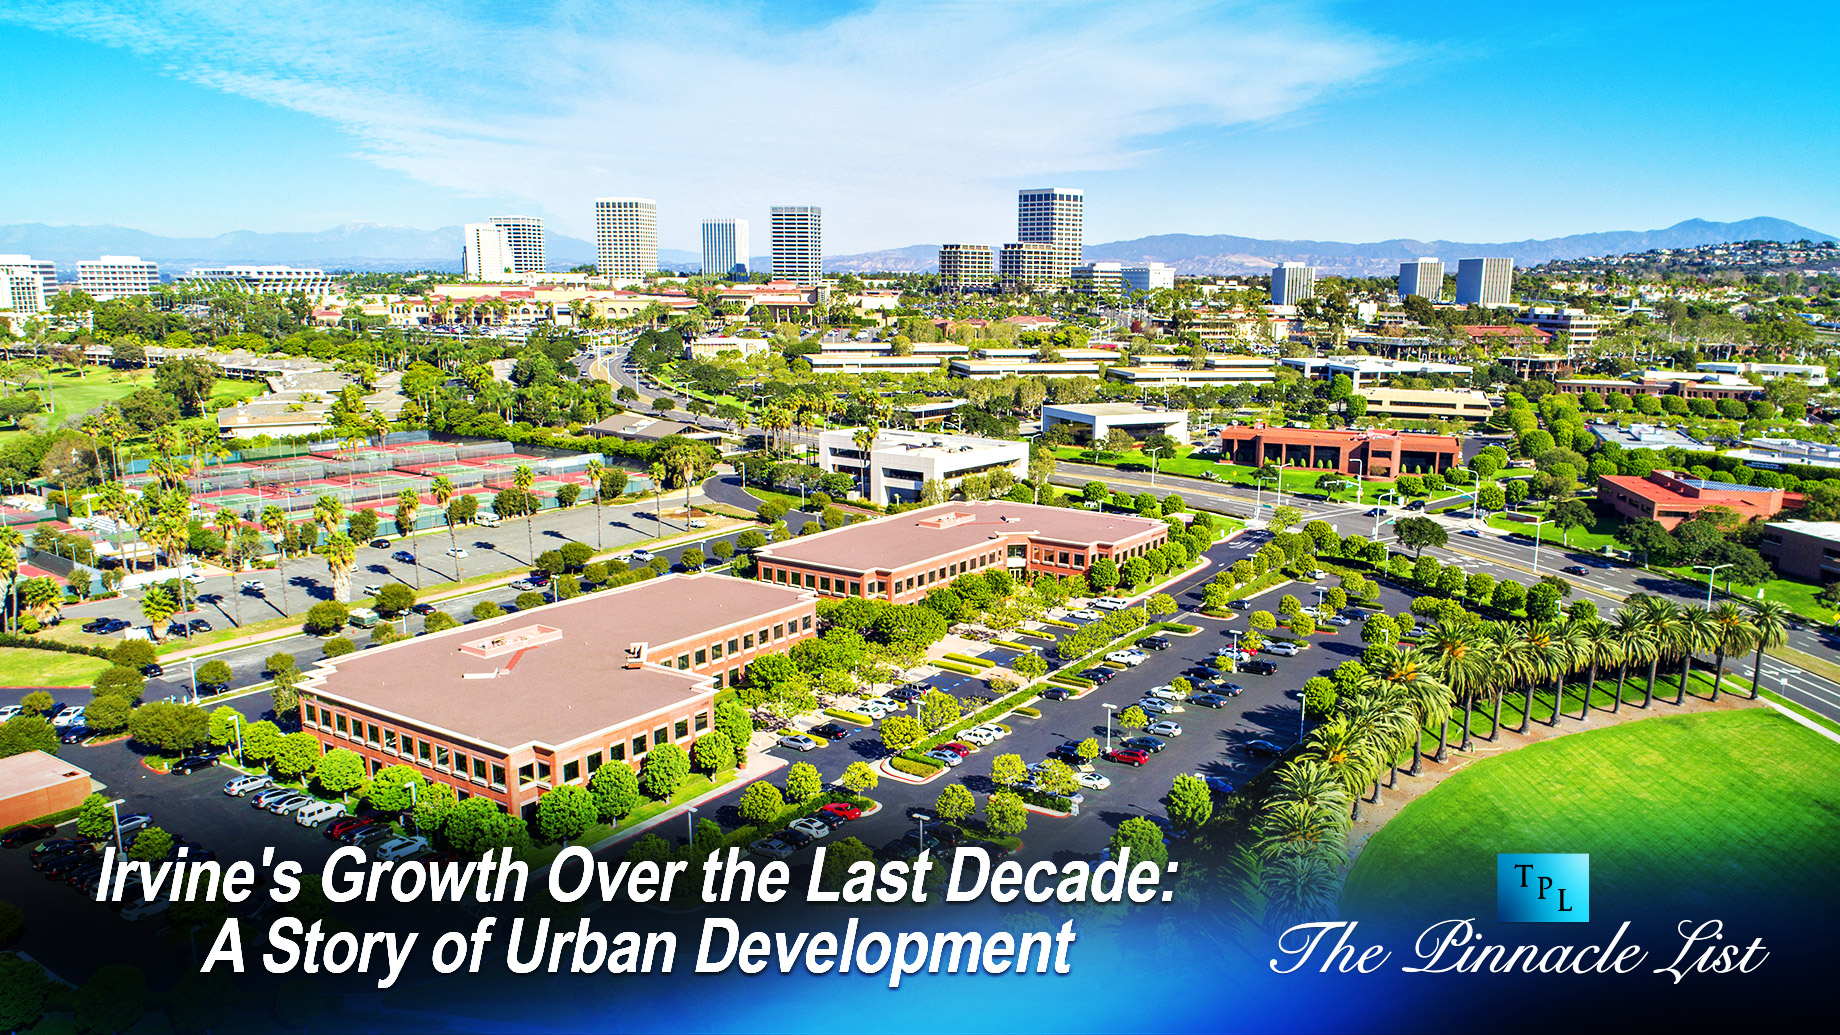 Irvine's Growth Over the Last Decade: A Story of Urban Development